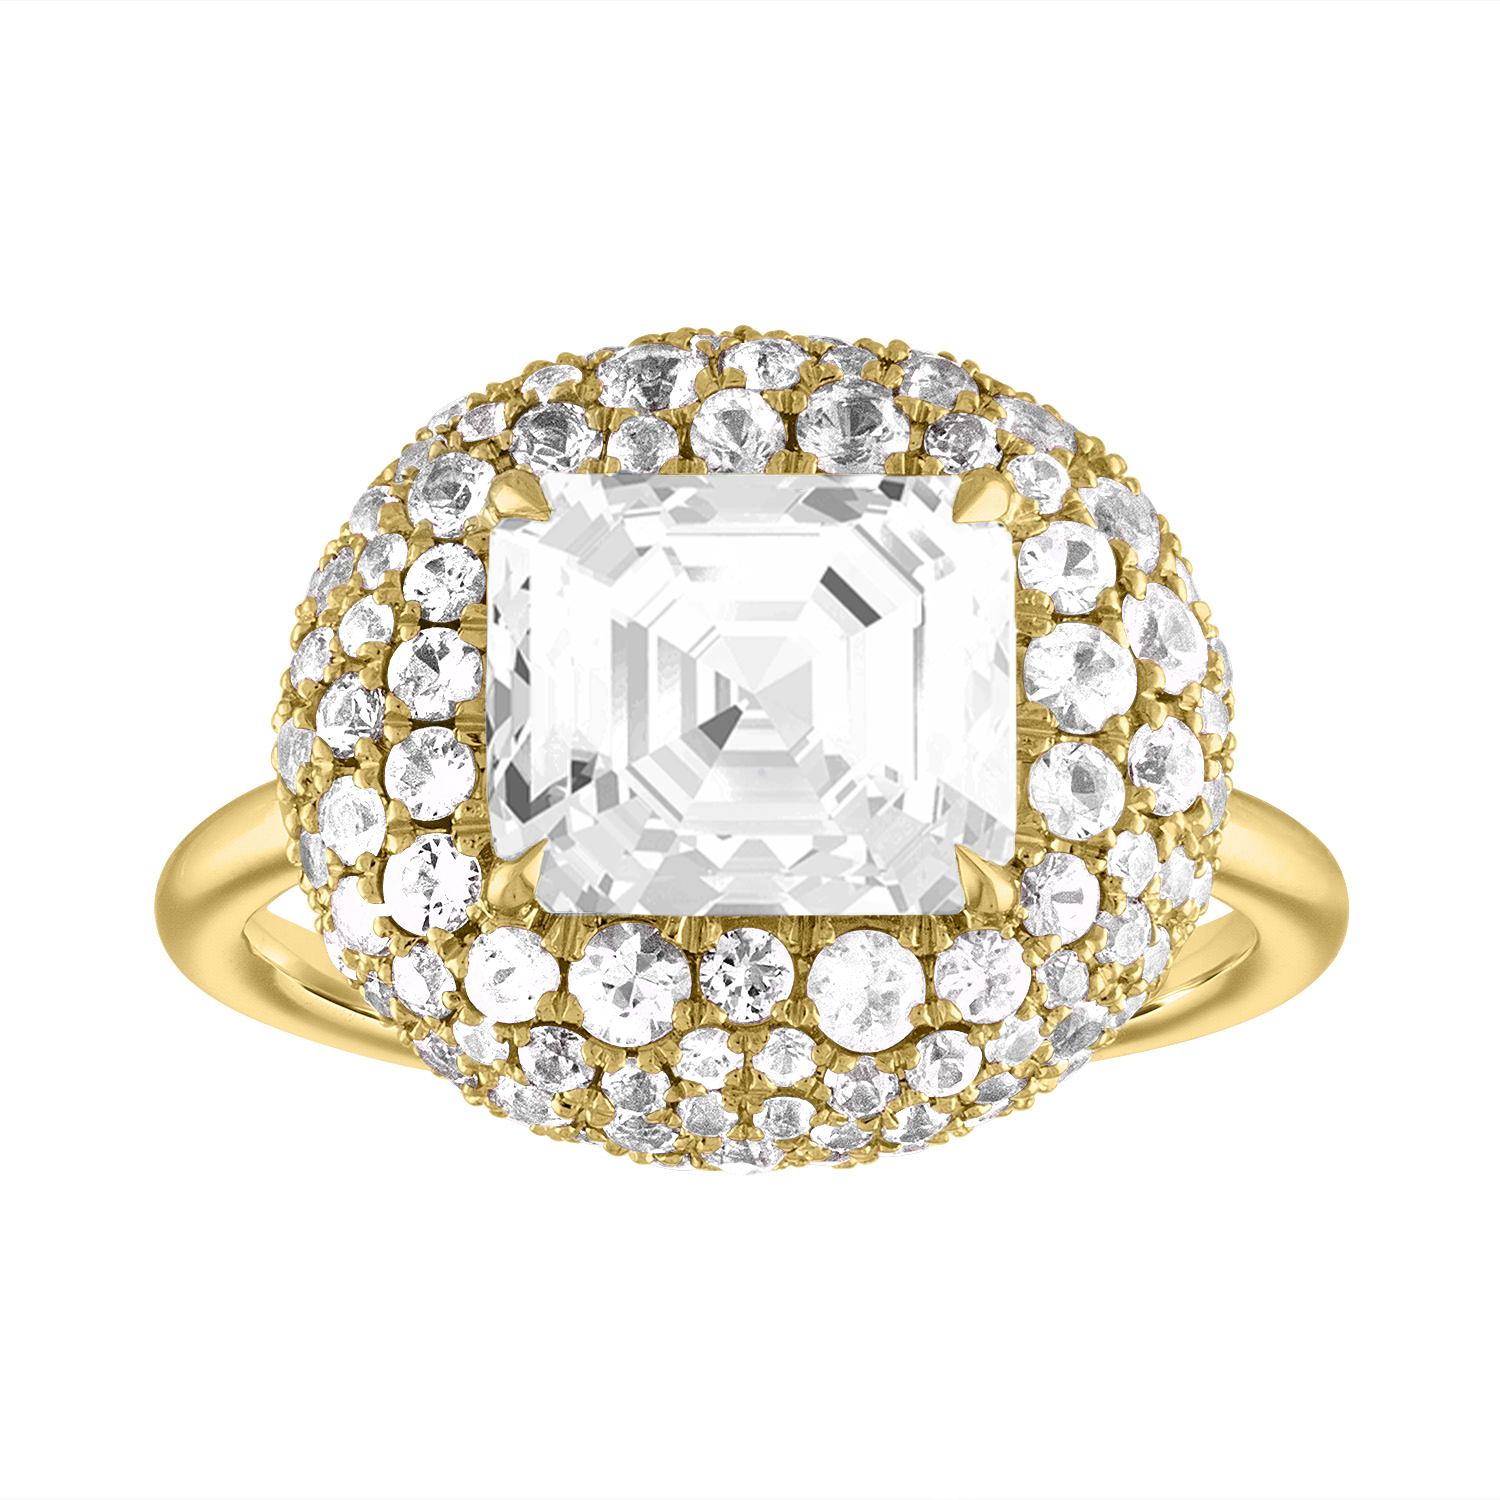 Asscher Bombe Engagement Ring in Yellow Gold